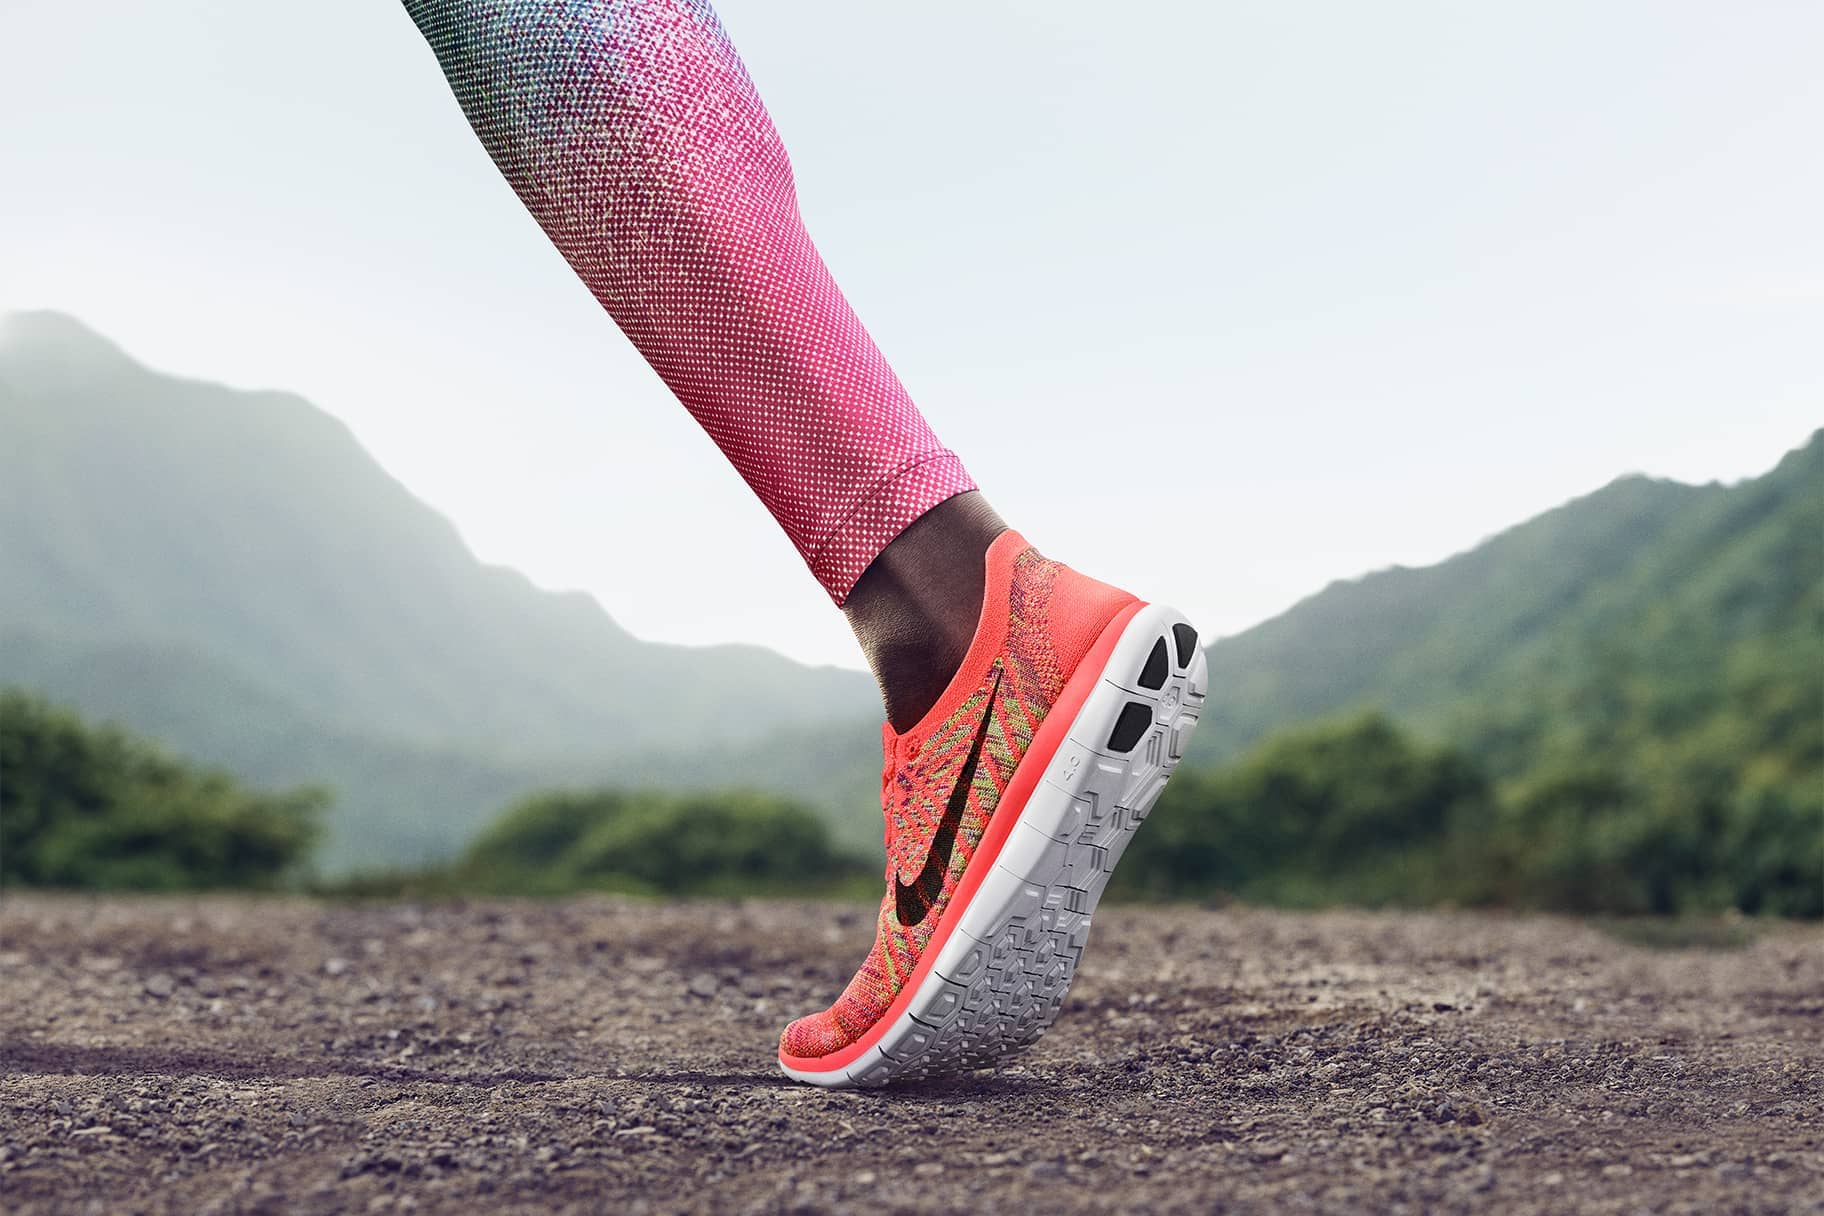 Tips for Buying Minimalist Barefoot Running Shoes. Nike AT